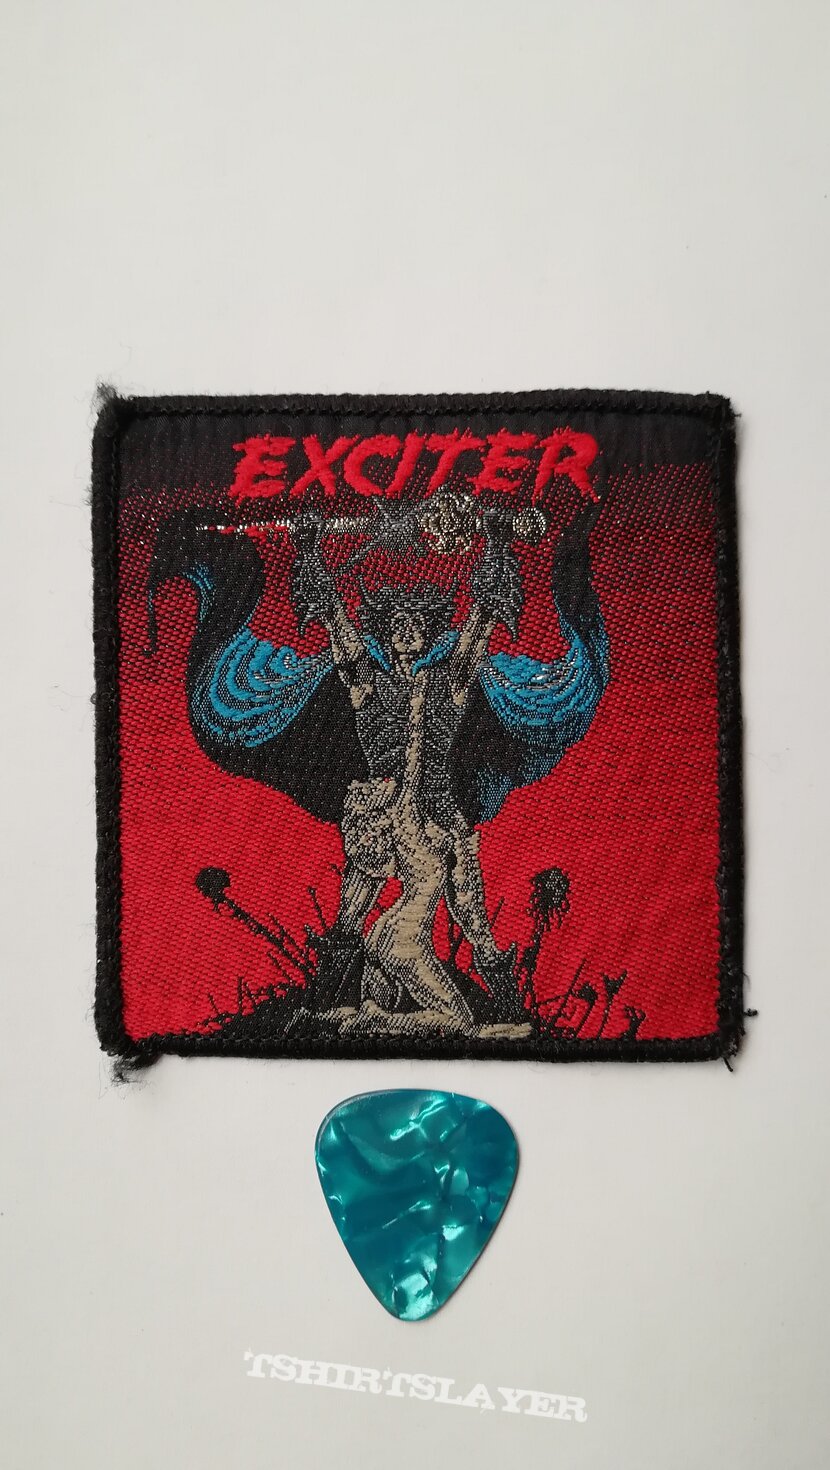 Exciter - Long Live The Loud - Patch 